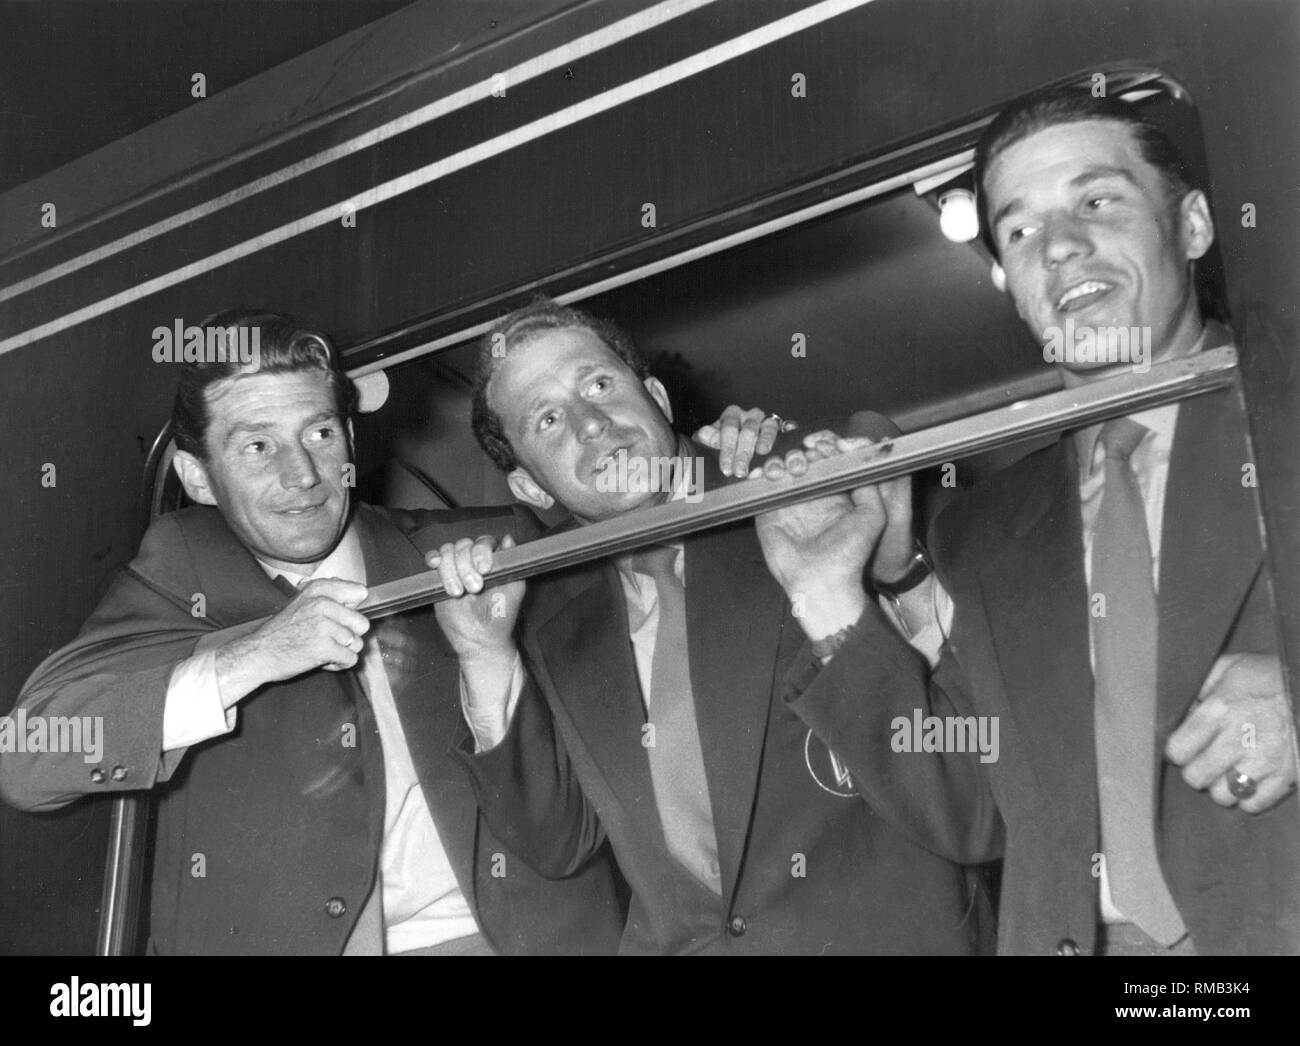 Arrival of the crew at the station in Lindau. Fritz and Ottmar Walter (from left) and another player lean out of the train window. In 1954 Germany won its first World Cup in Switzerland. Stock Photo